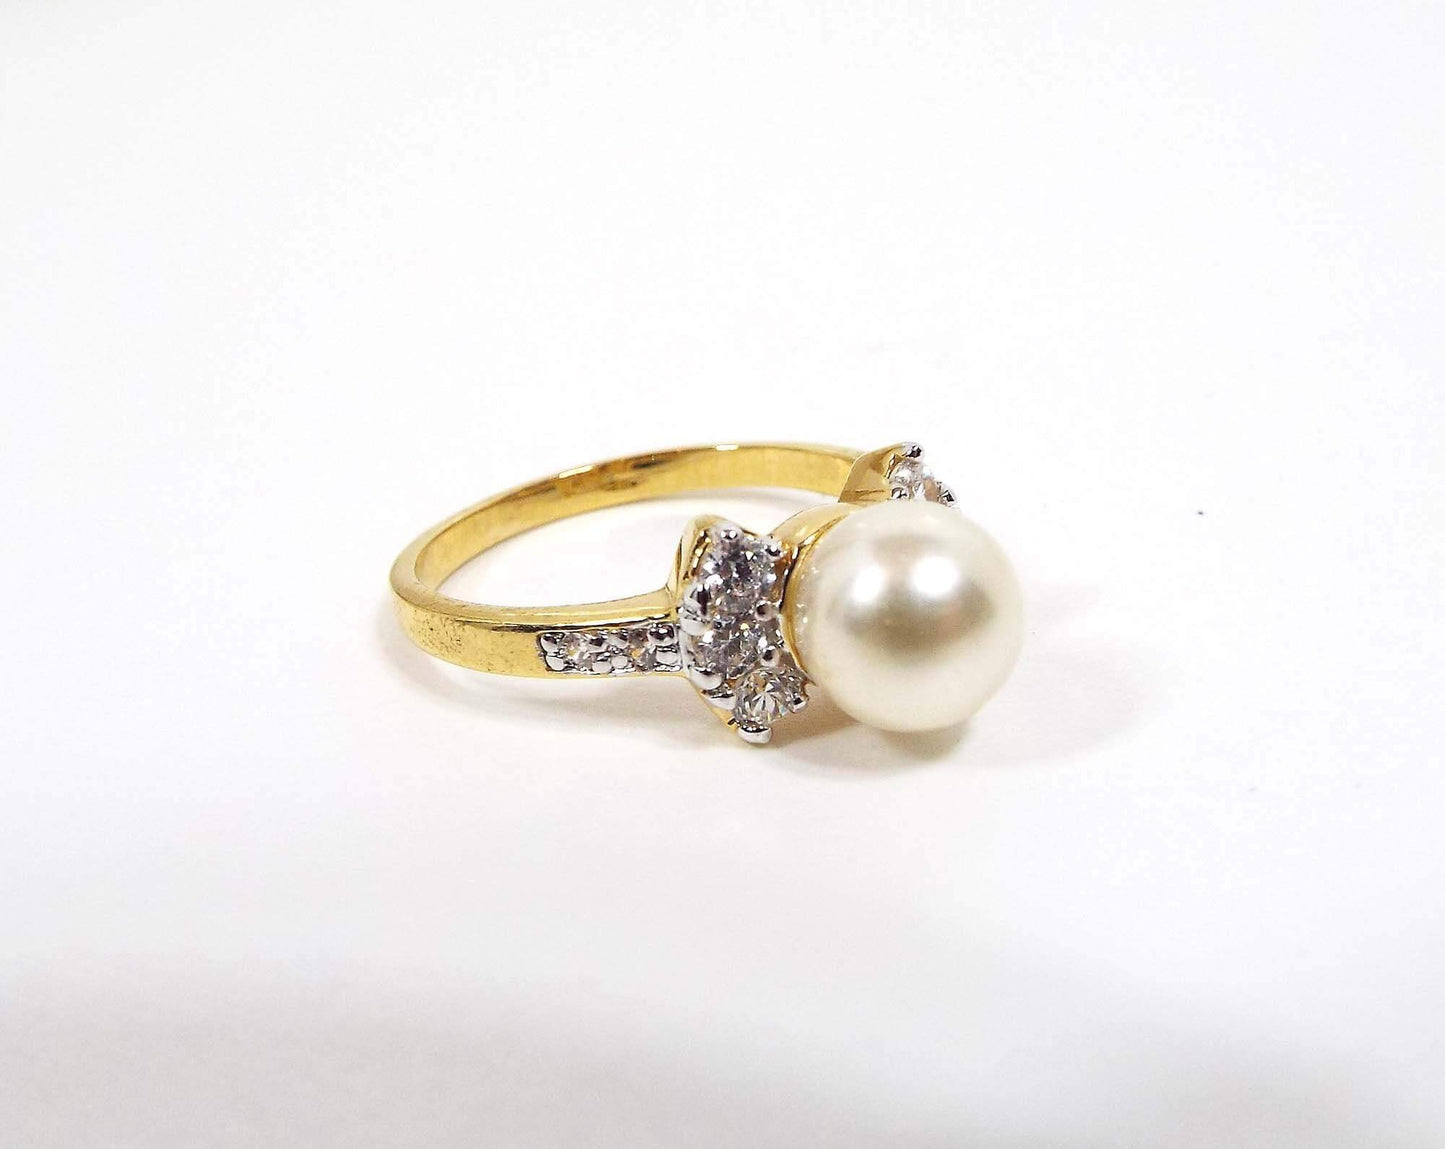 Edco Faux Pearl and Rhinestone Vintage Cocktail Ring